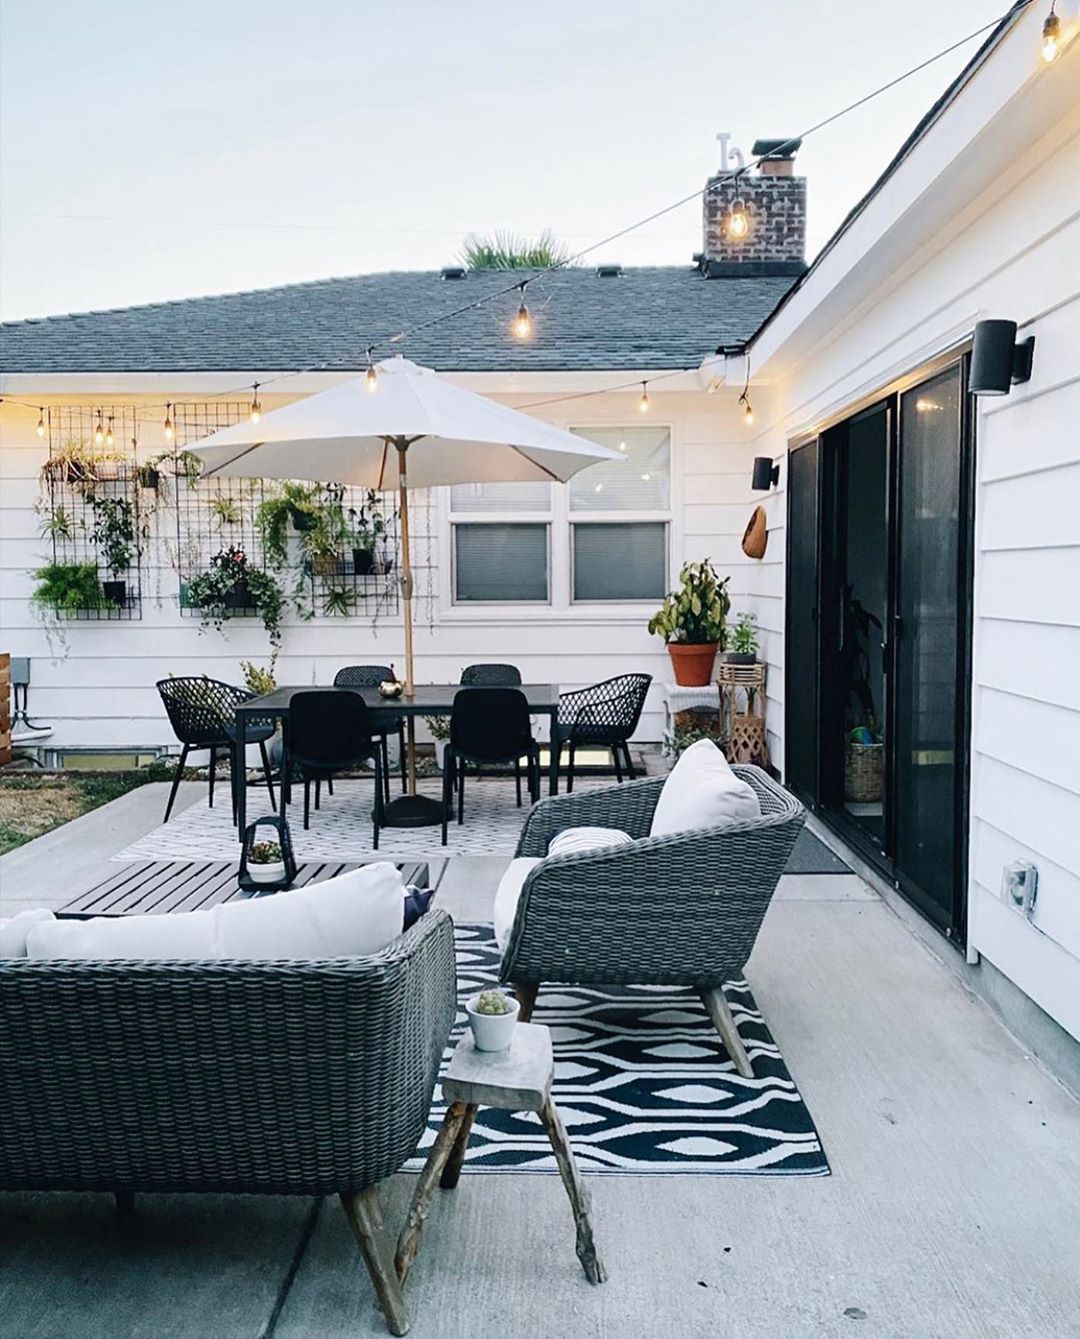 Backyard Patio with String Lights Overhead. Photo by Instagram user @arborand.co